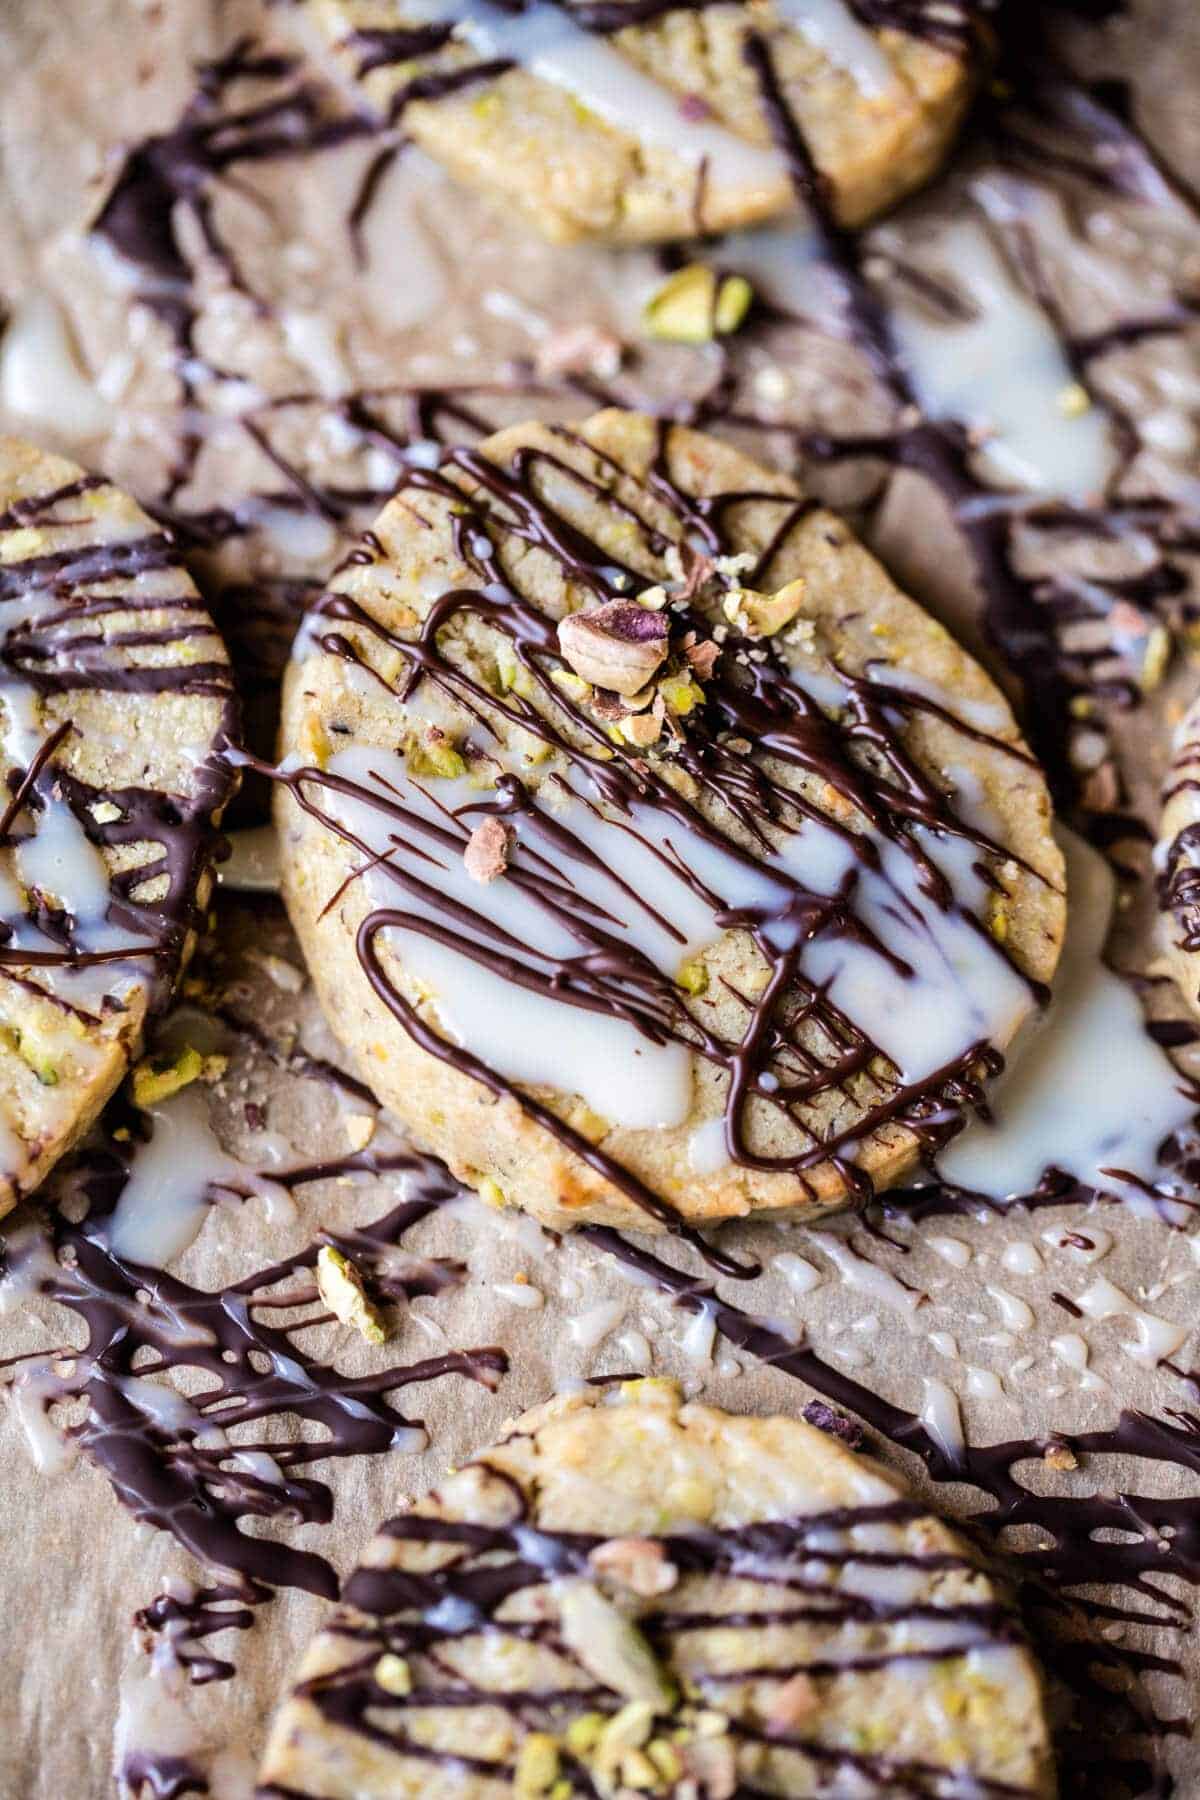 Pistachio Butter Cookies with Chocolate Tres Leches Drizzle | halfbakedharvest.com @hbharevest